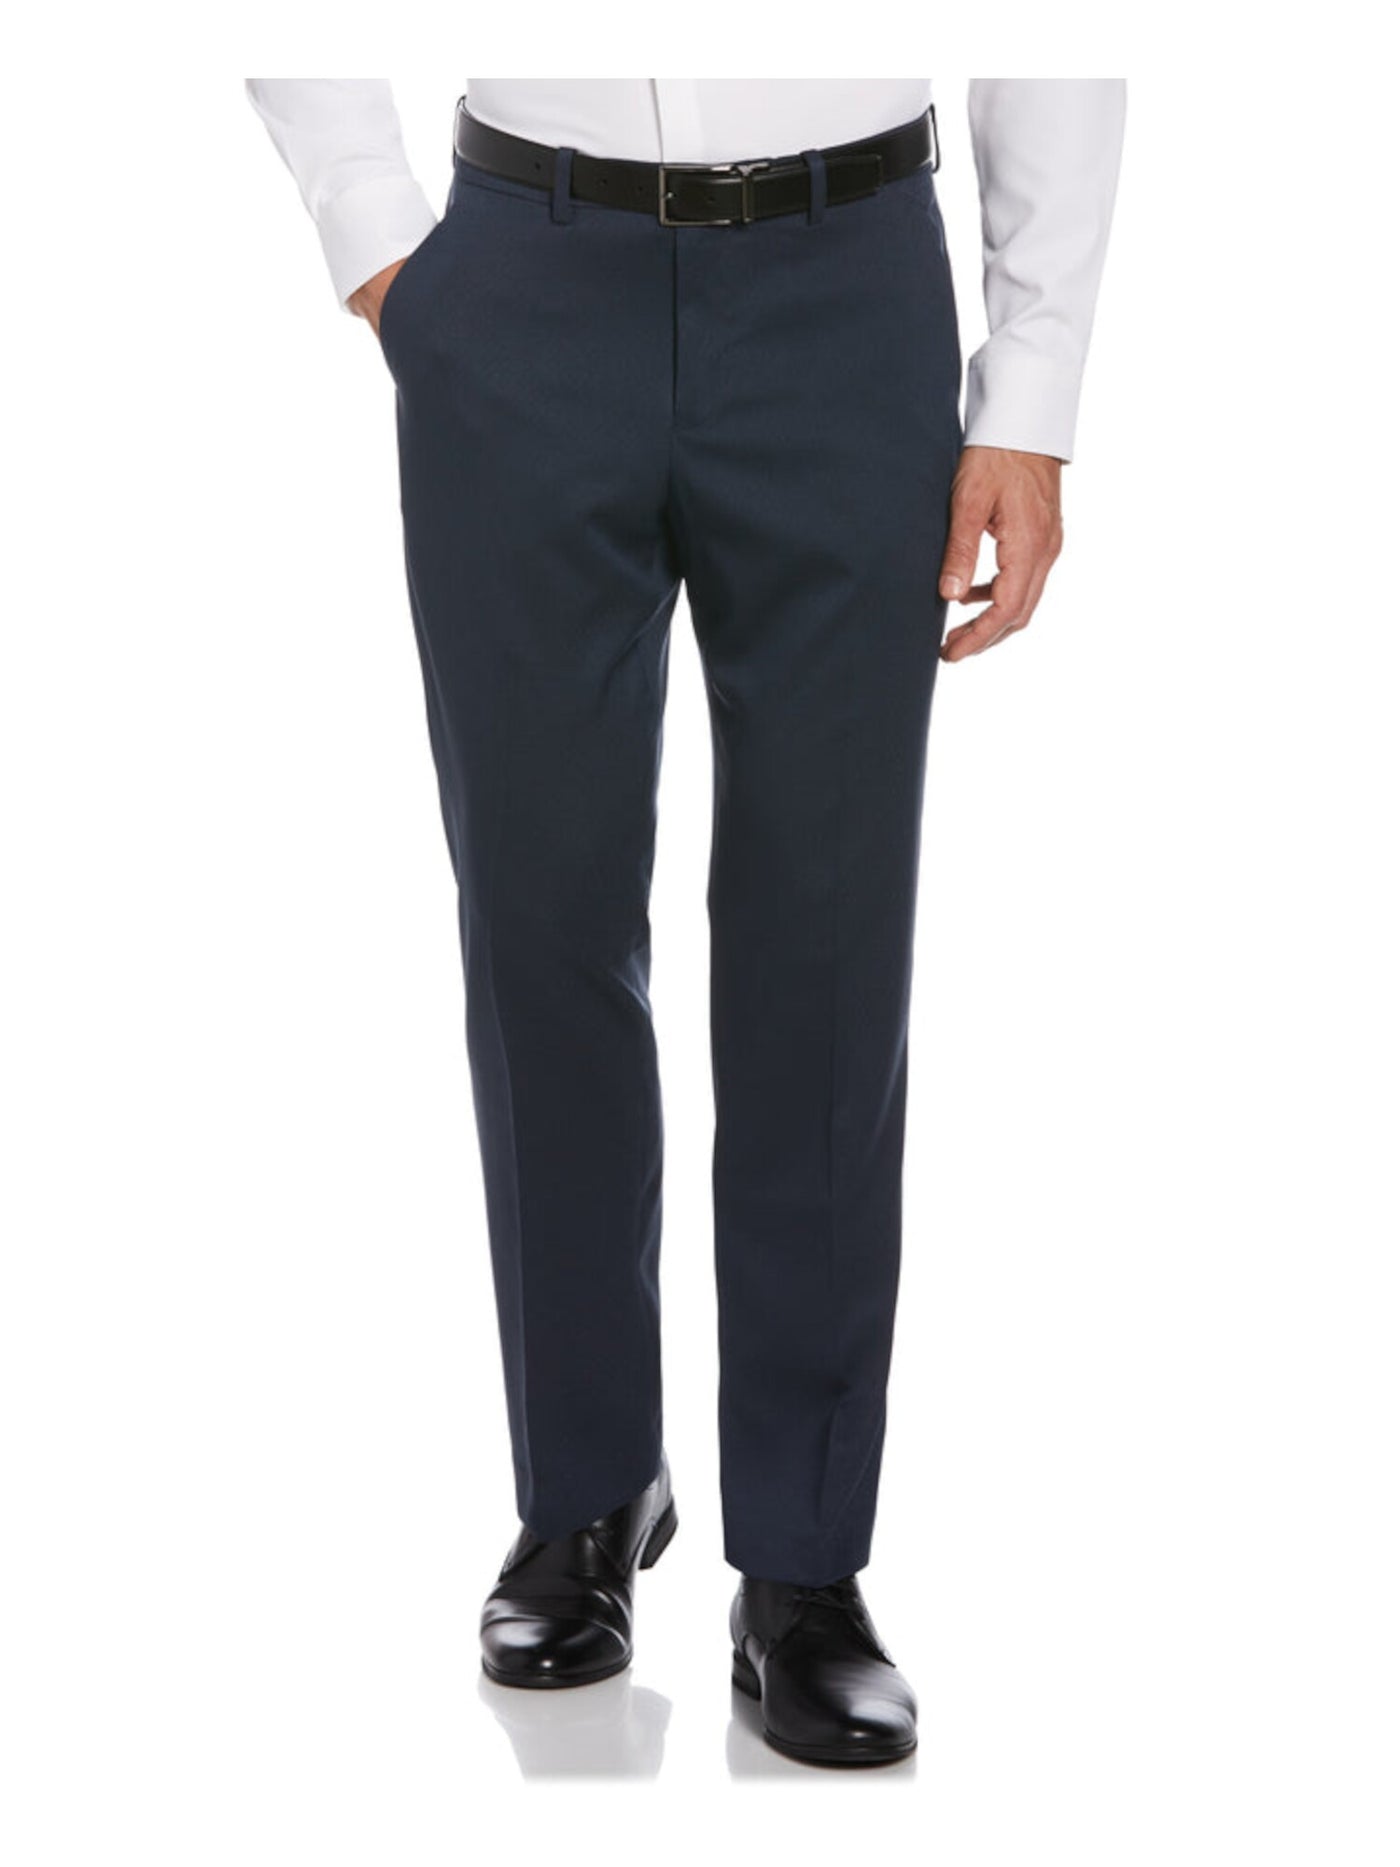 PERRY ELLIS Mens Navy Straight Leg, Patterned Classic Fit Pants 30 X 30